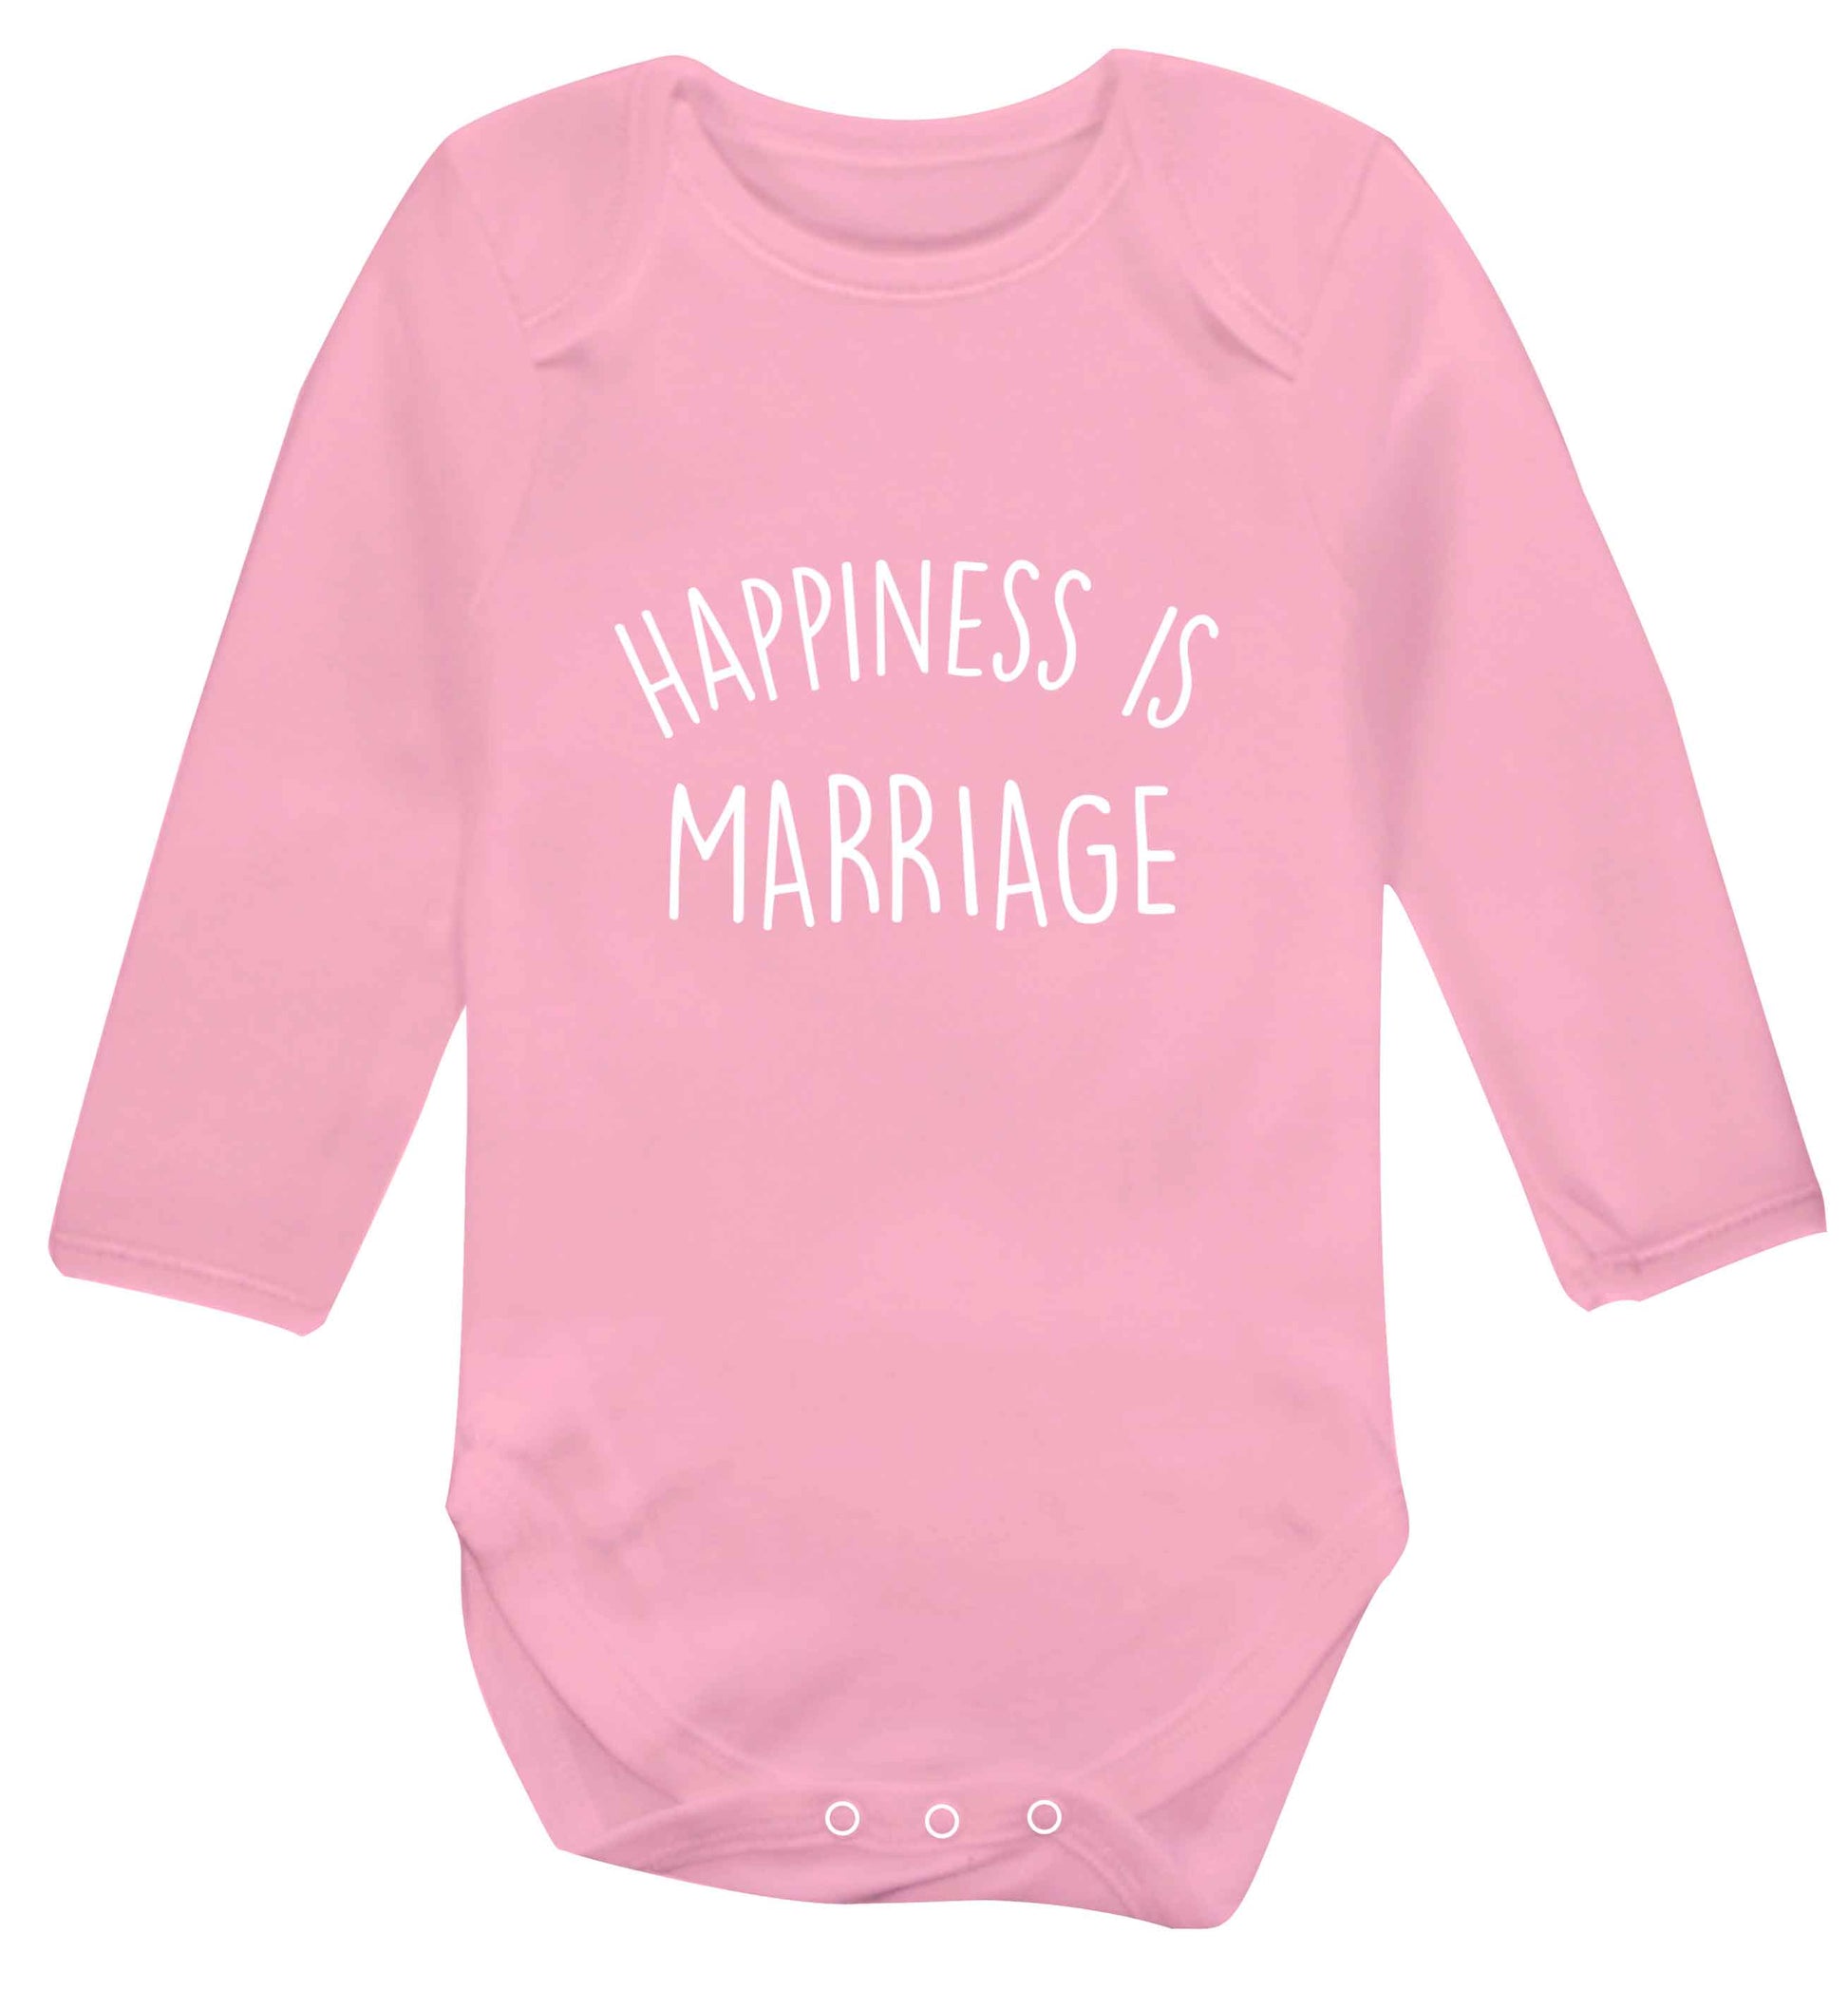 Happiness is marriage baby vest long sleeved pale pink 6-12 months